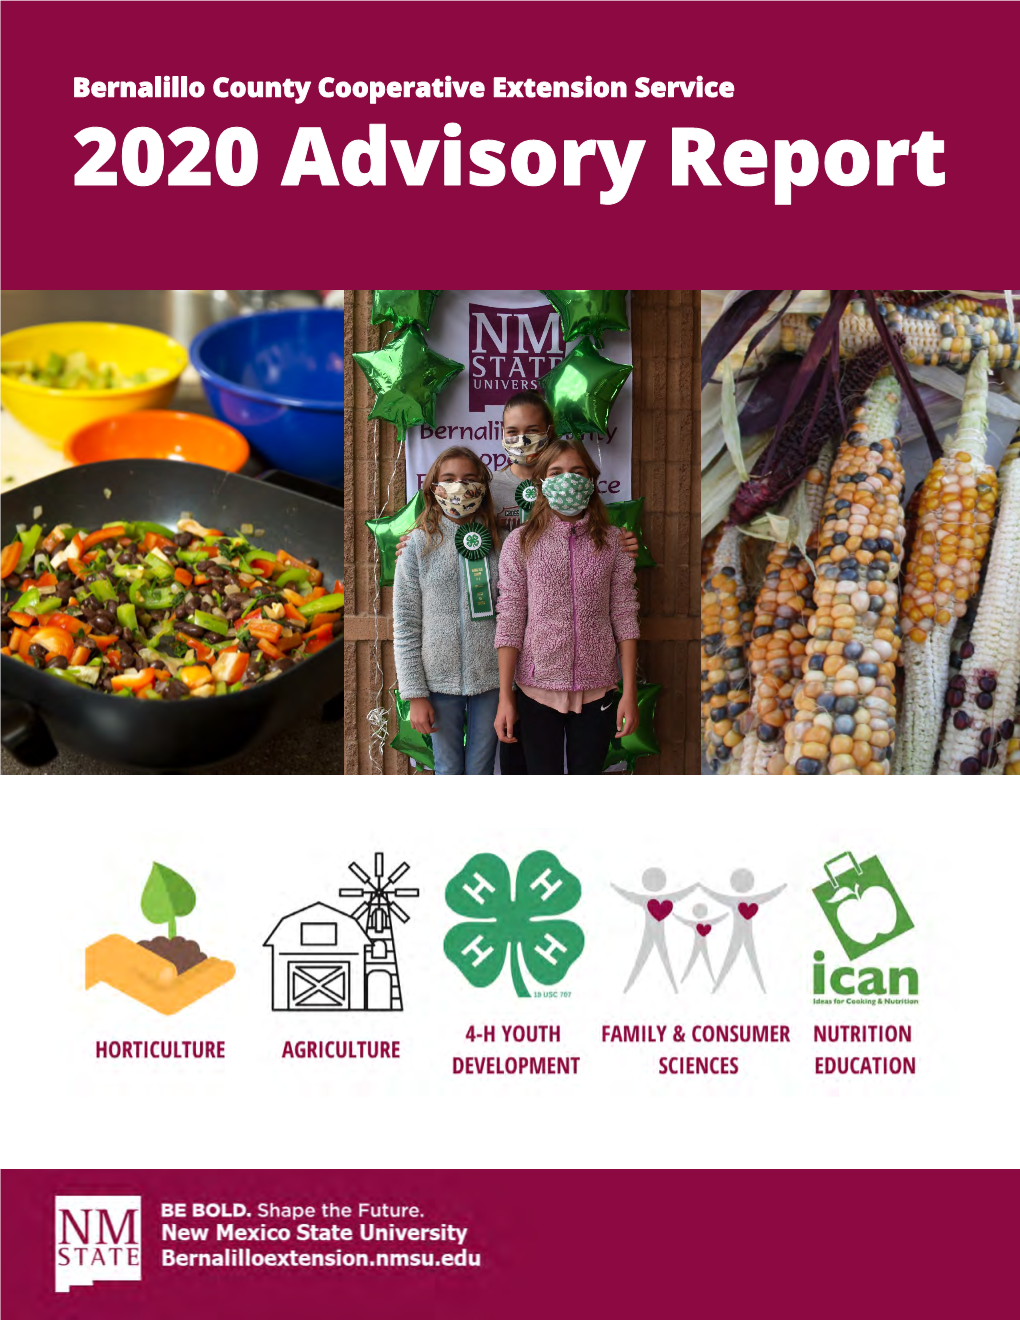 2020 Advisory Report Table of Contents